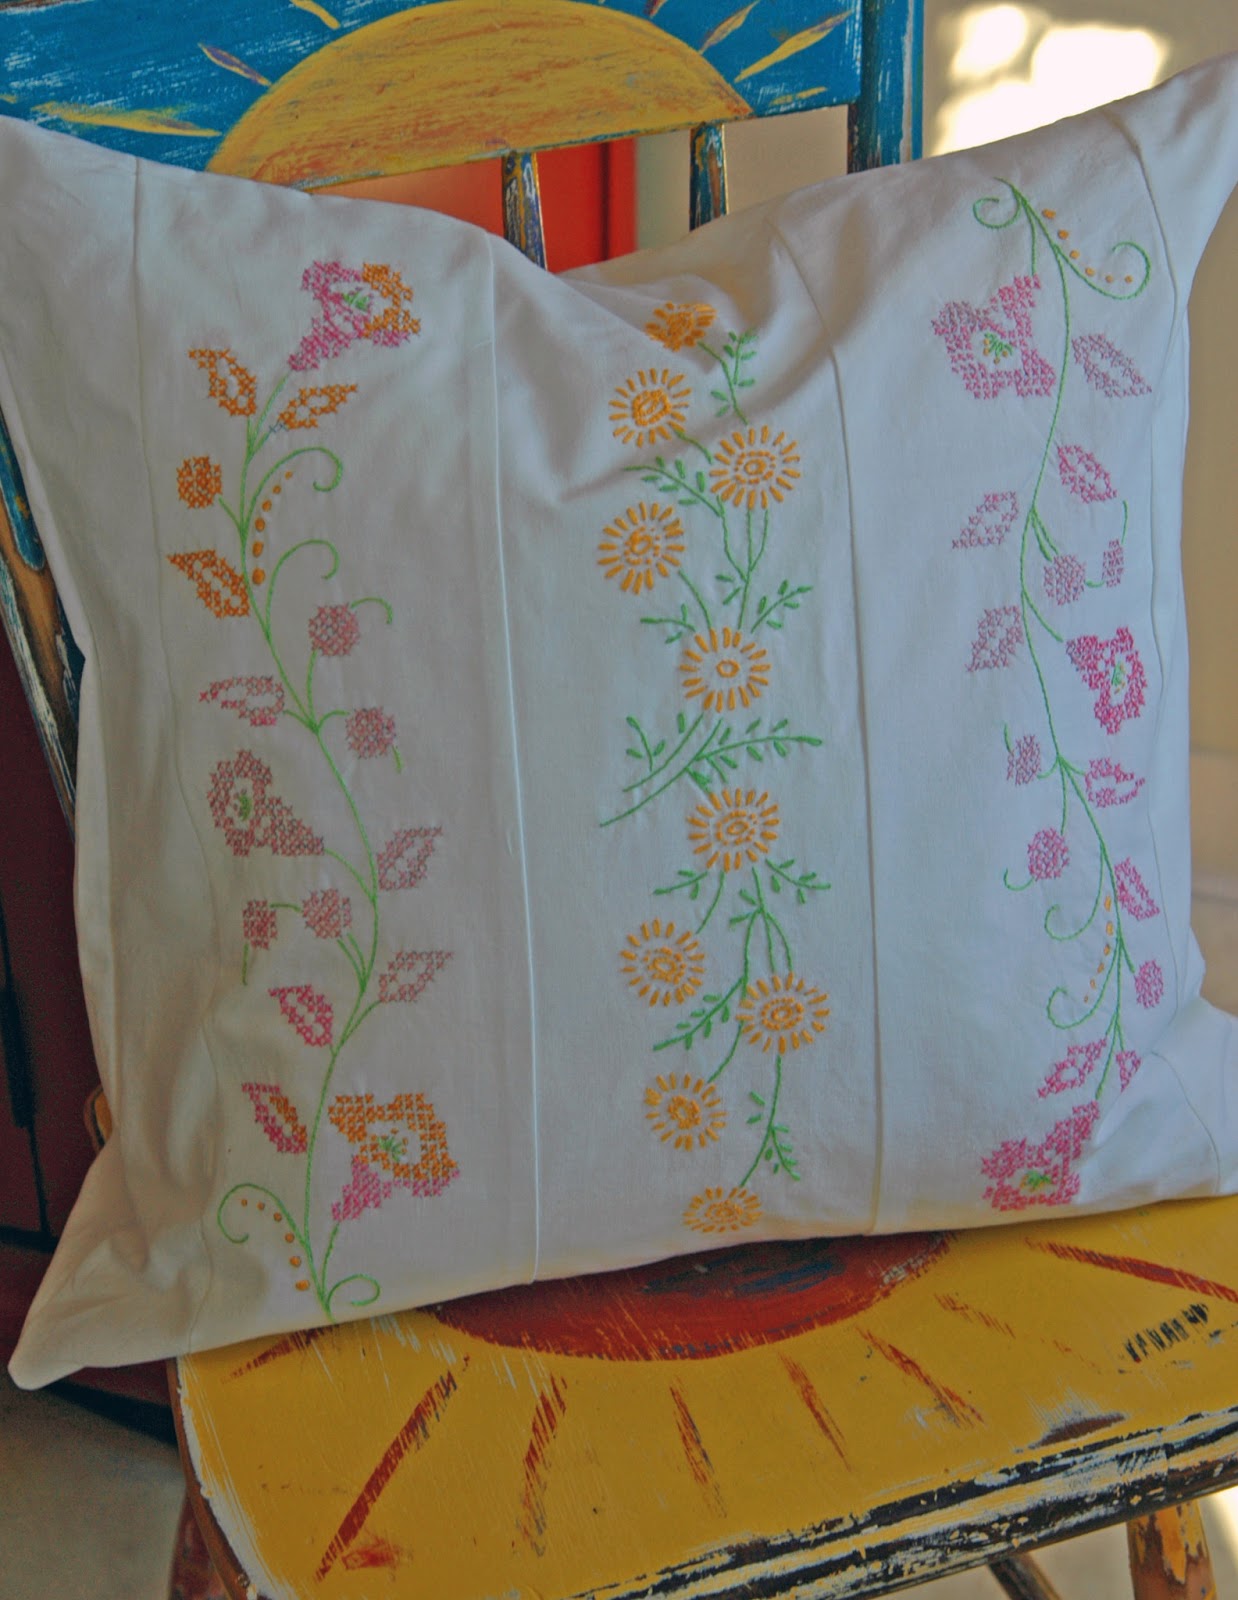 deborah jean's DANDELION HOUSE and GARDEN : New/Old Embroidered Pillow